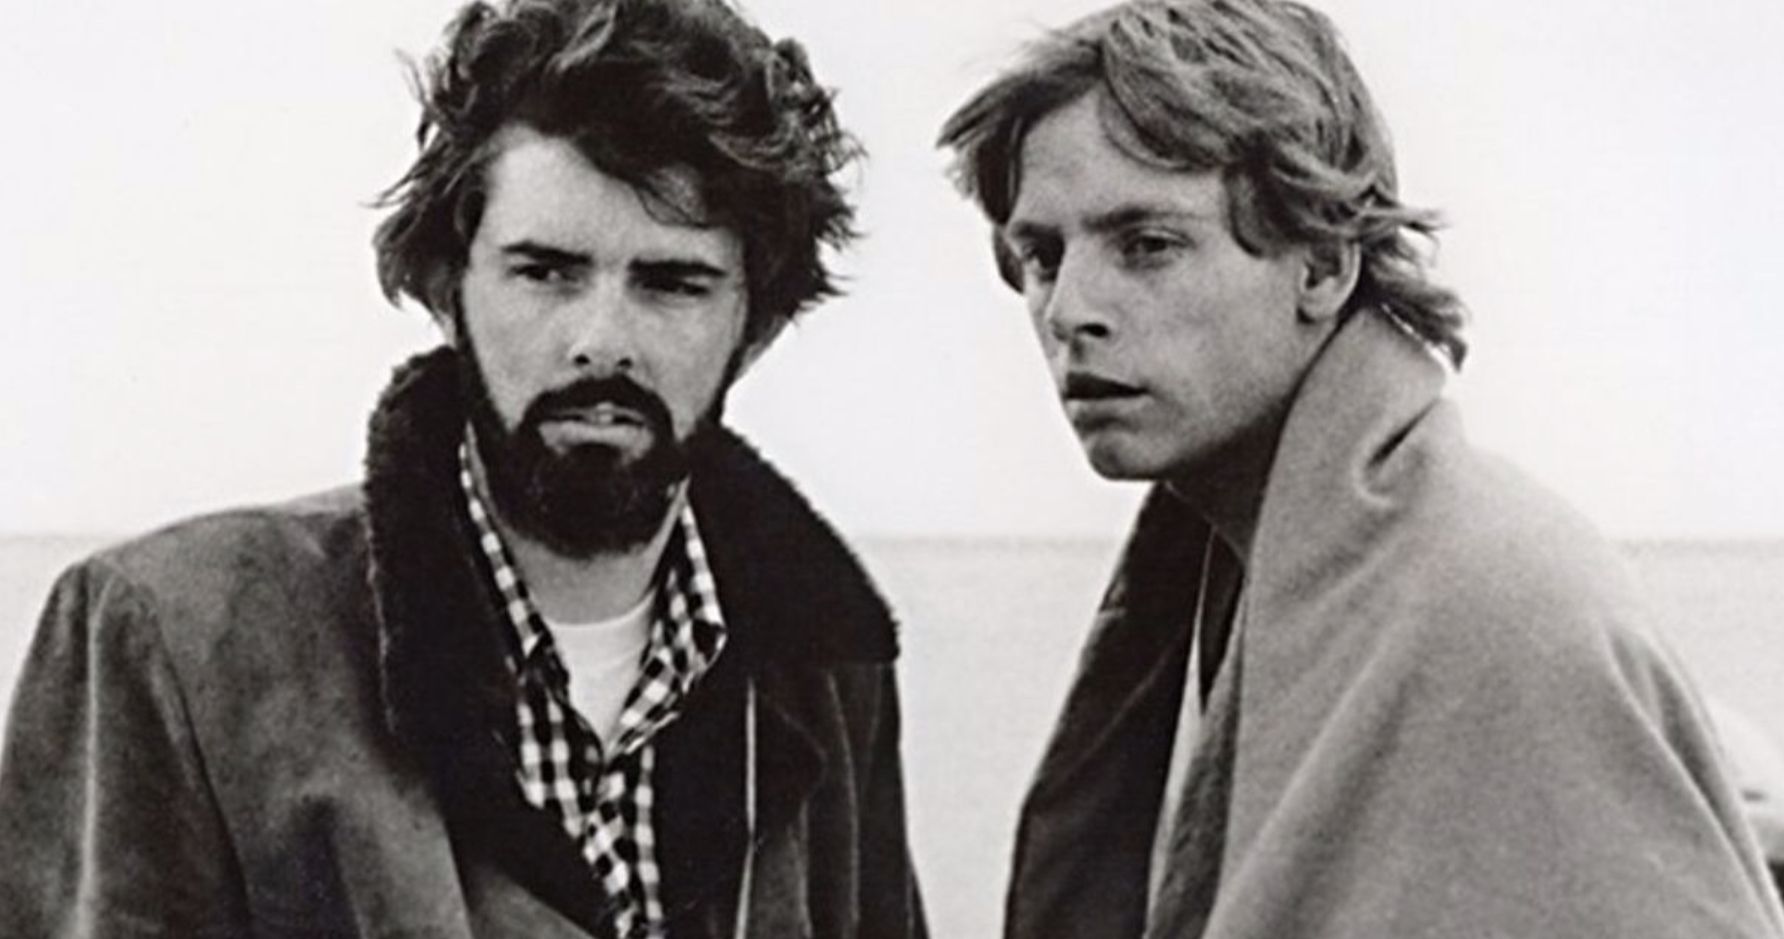 Mark Hamill Pays Tribute to George Lucas Ahead of Star Wars 9 Debut